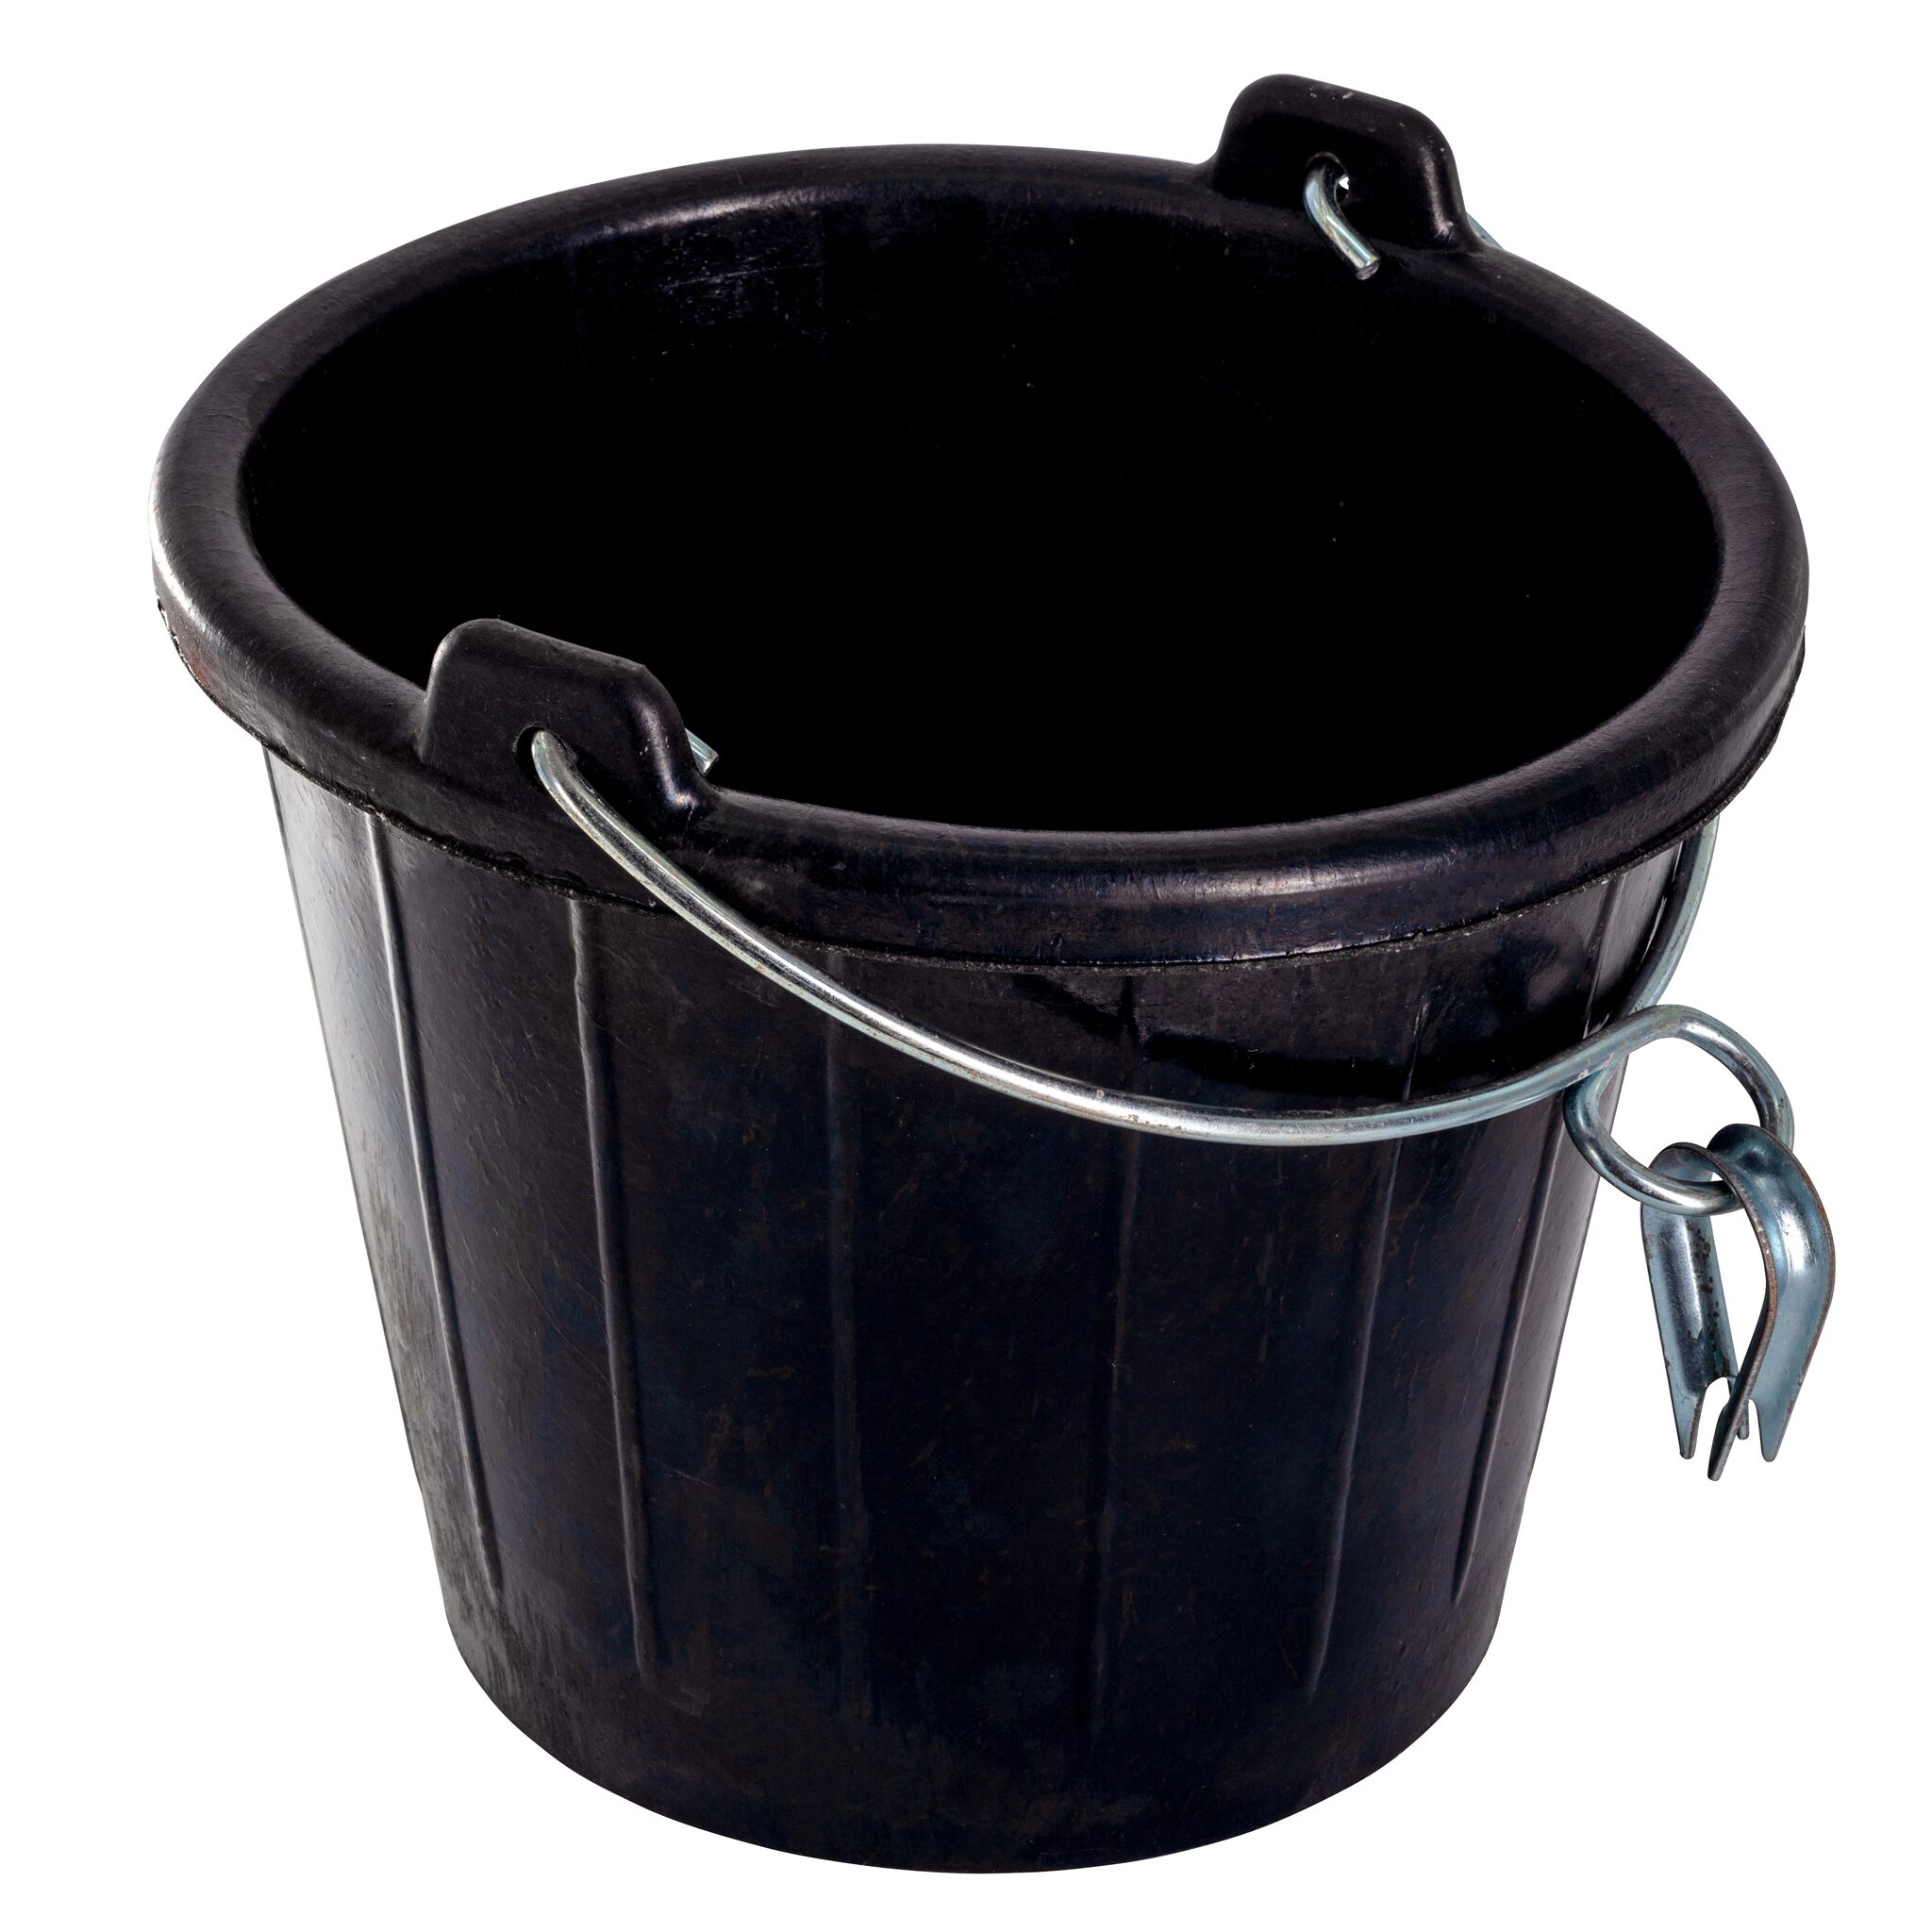 Yachticon rubber bucket, 8 liters